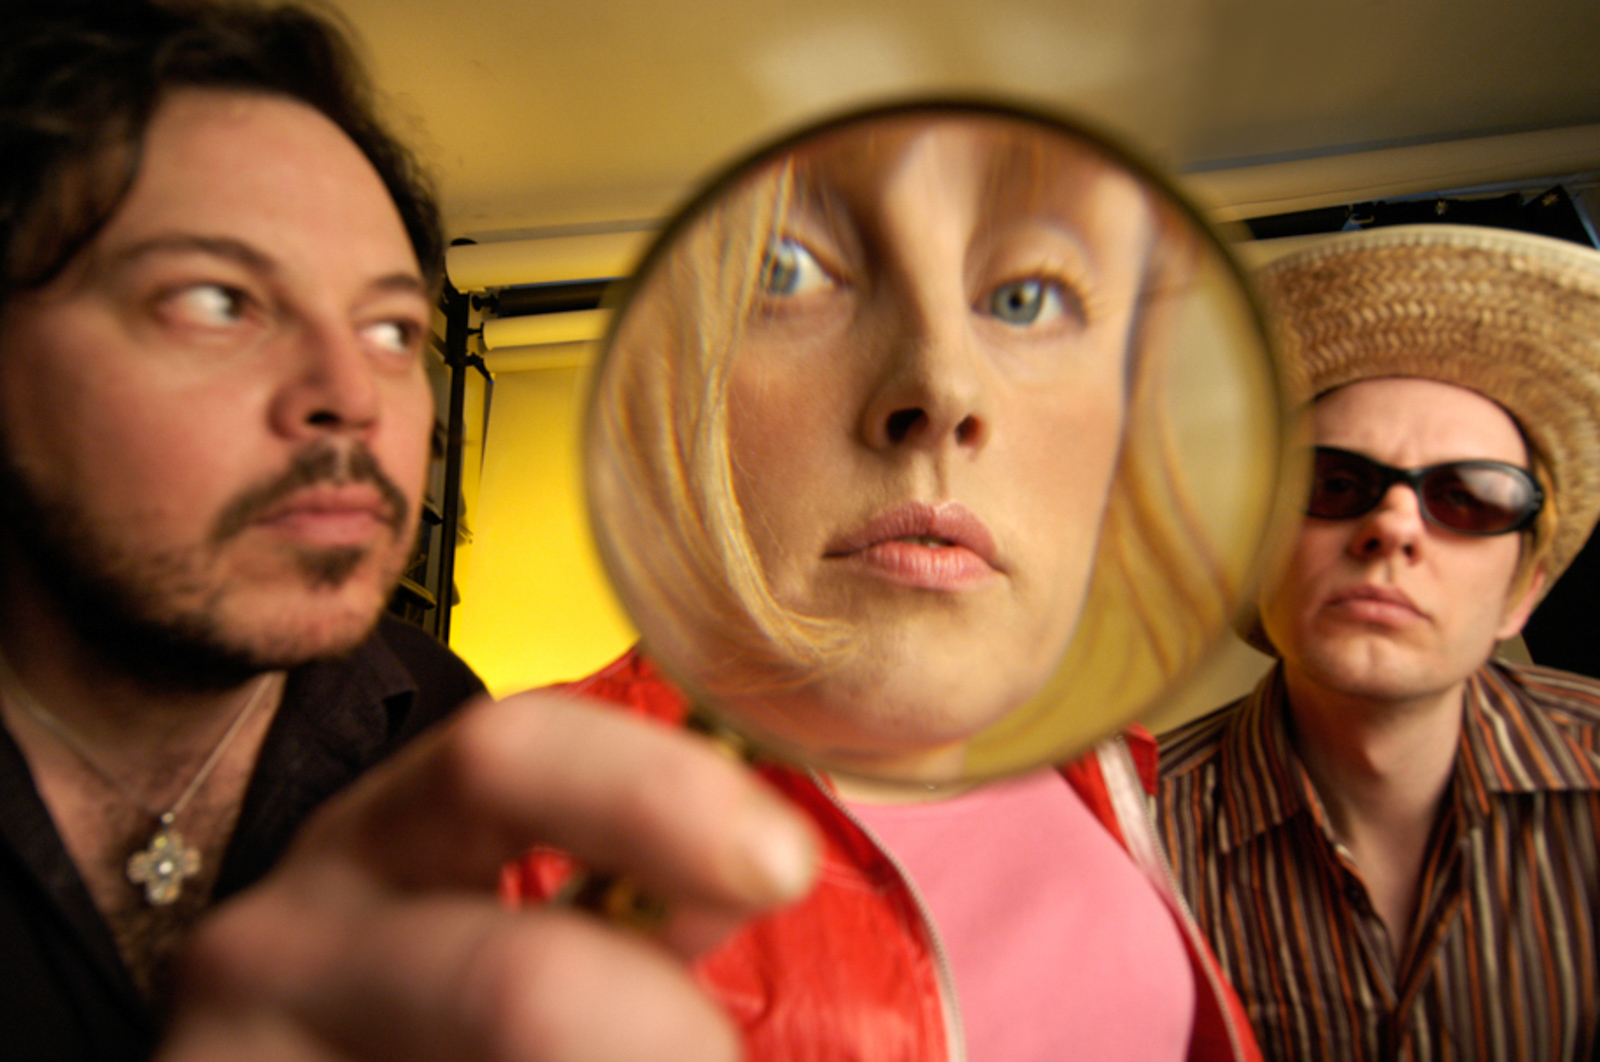 Portrait of band, with a man holding a magnifying glass in front of a woman's face